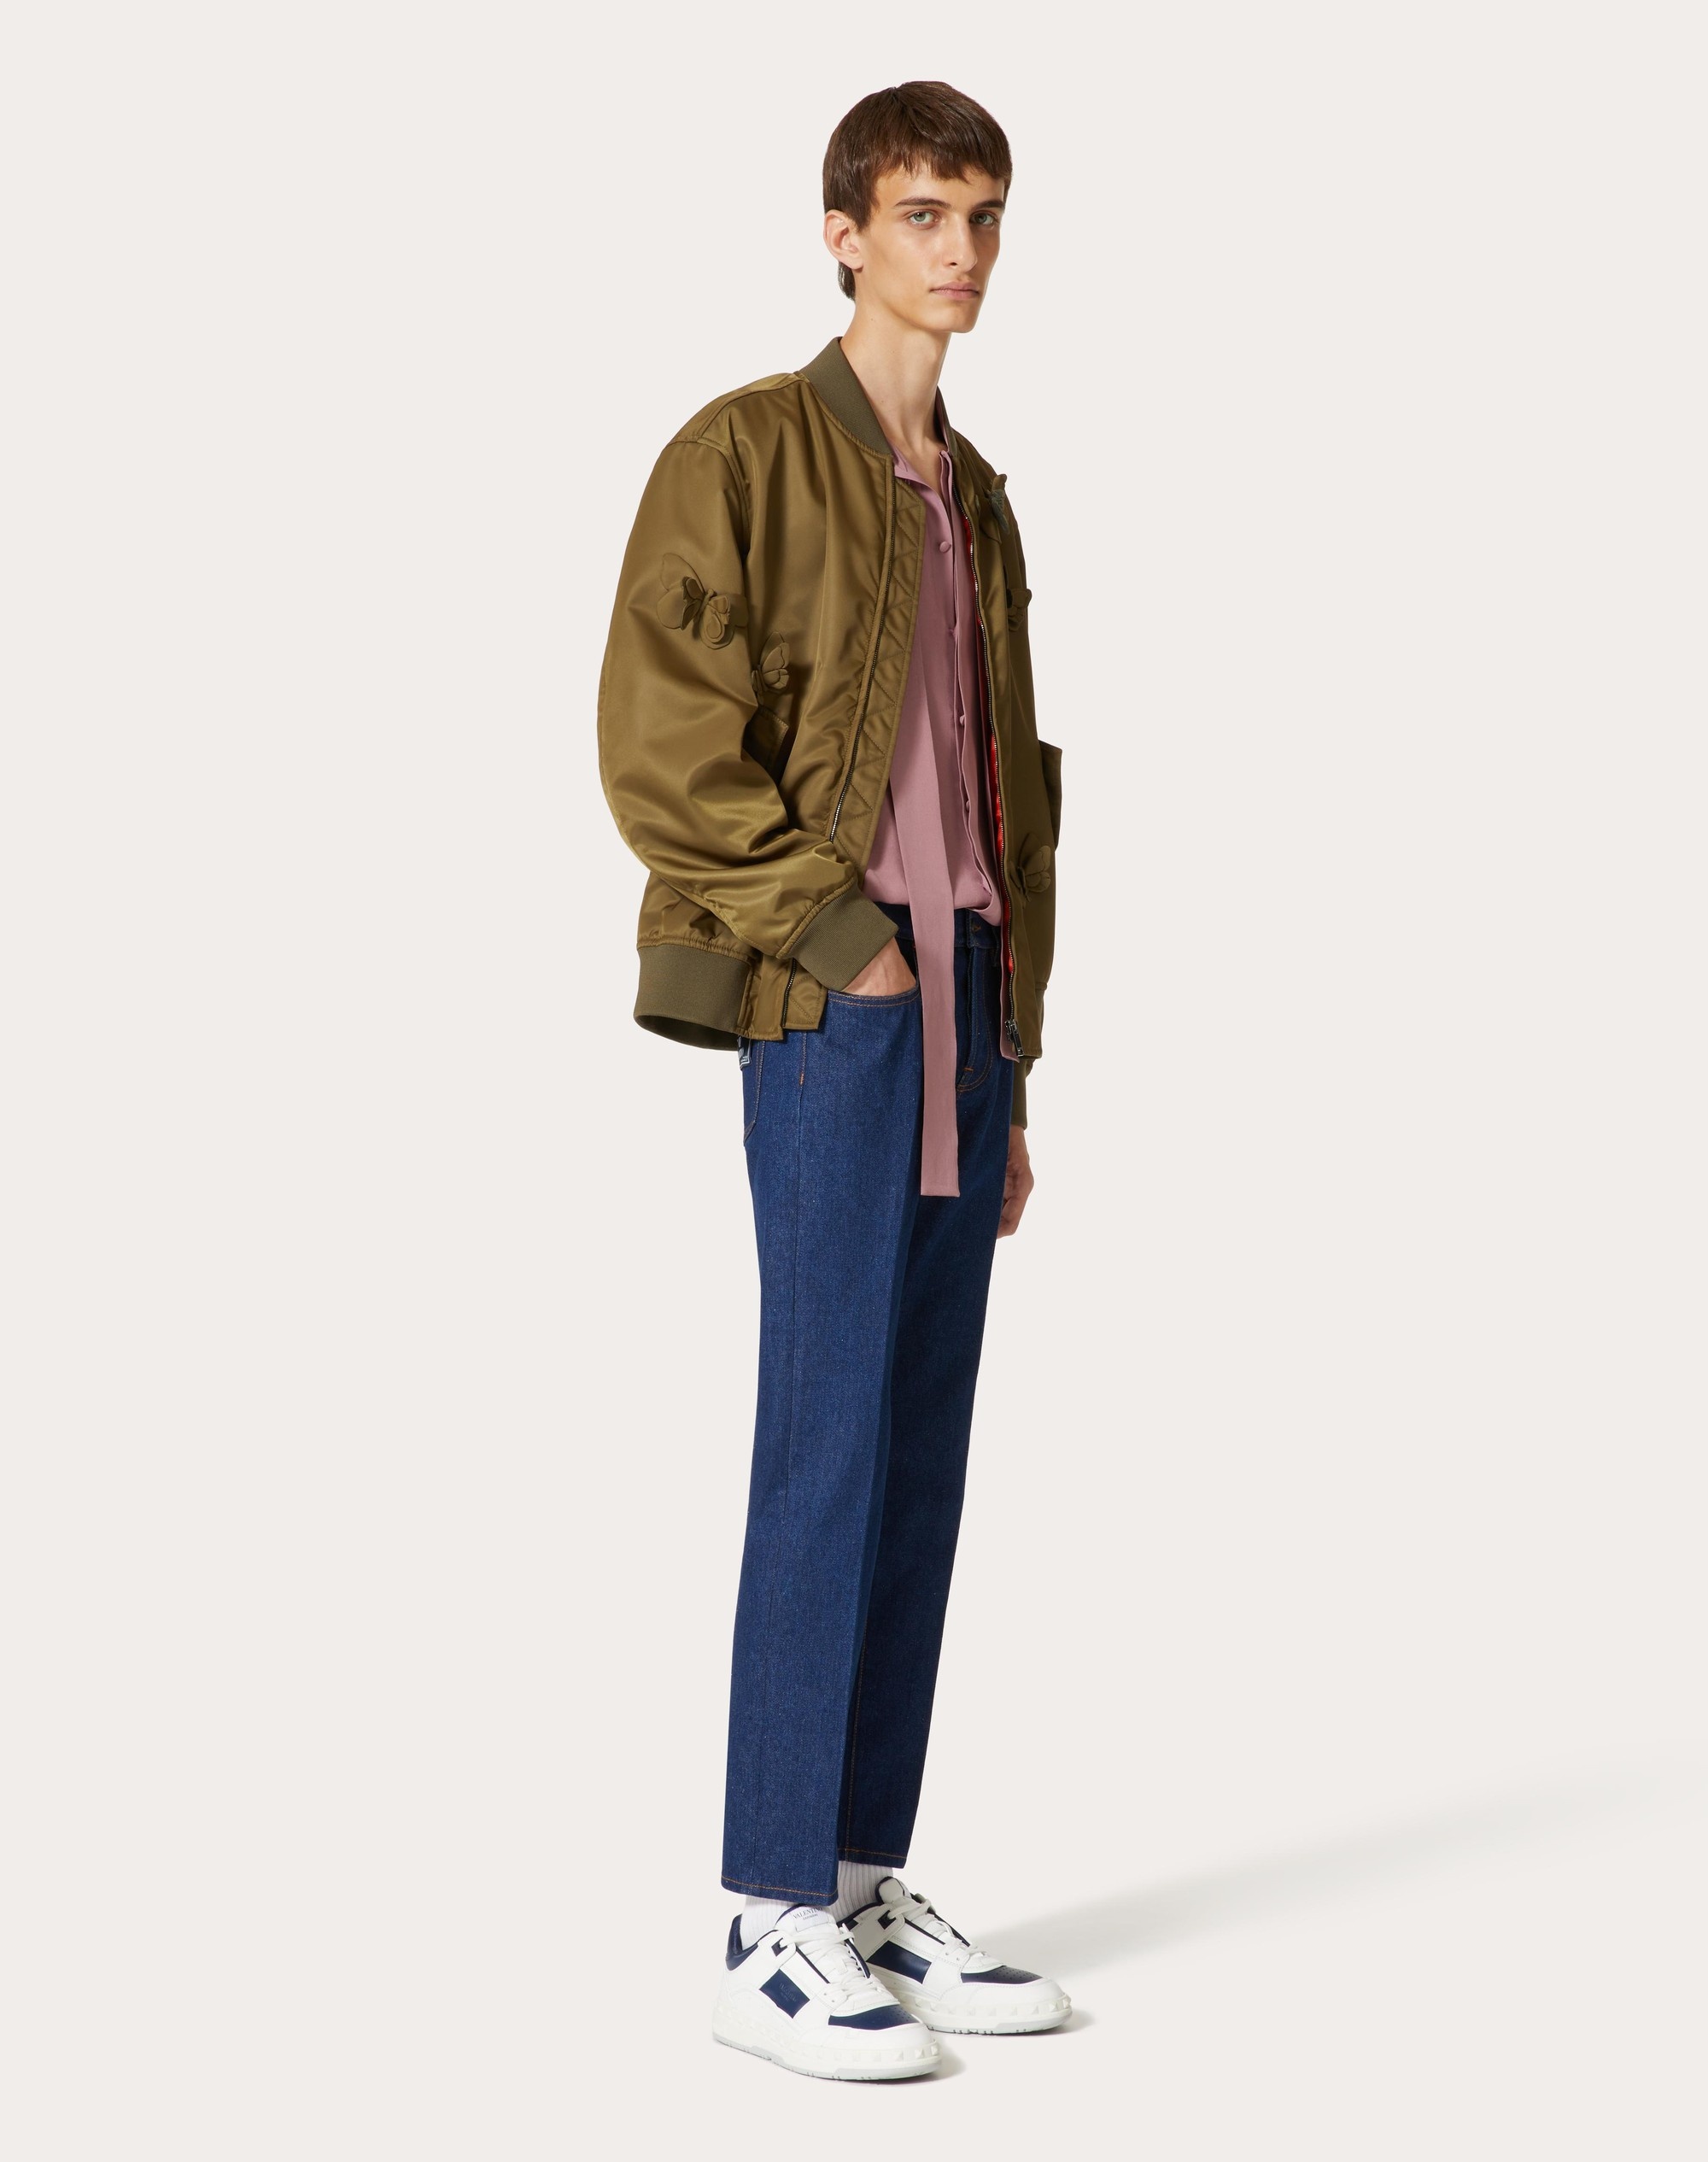 DENIM PANTS WITH MAISON VALENTINO TAILORING LABEL - 2